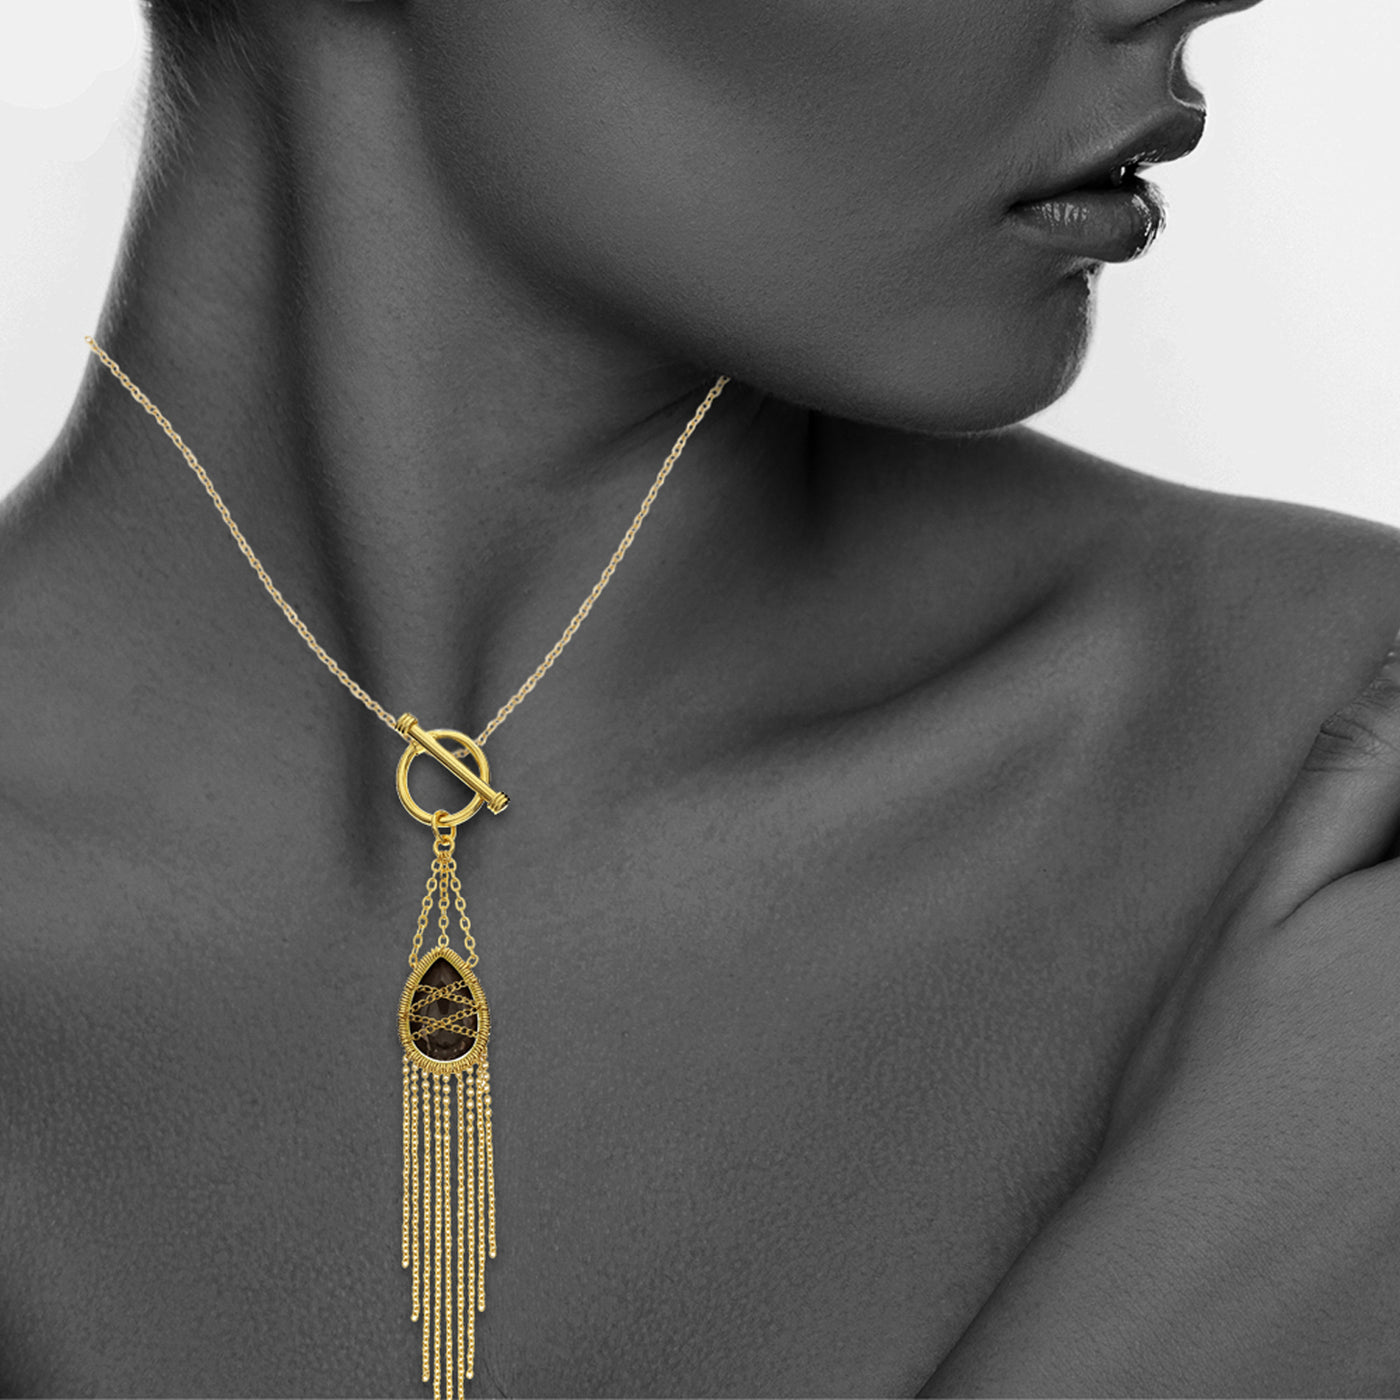 Gold Plated Sterling Silver Hand Wrapped Drape Chain Toggle Hanging Teardrop Smoky Quartz Stone Pendant Necklace